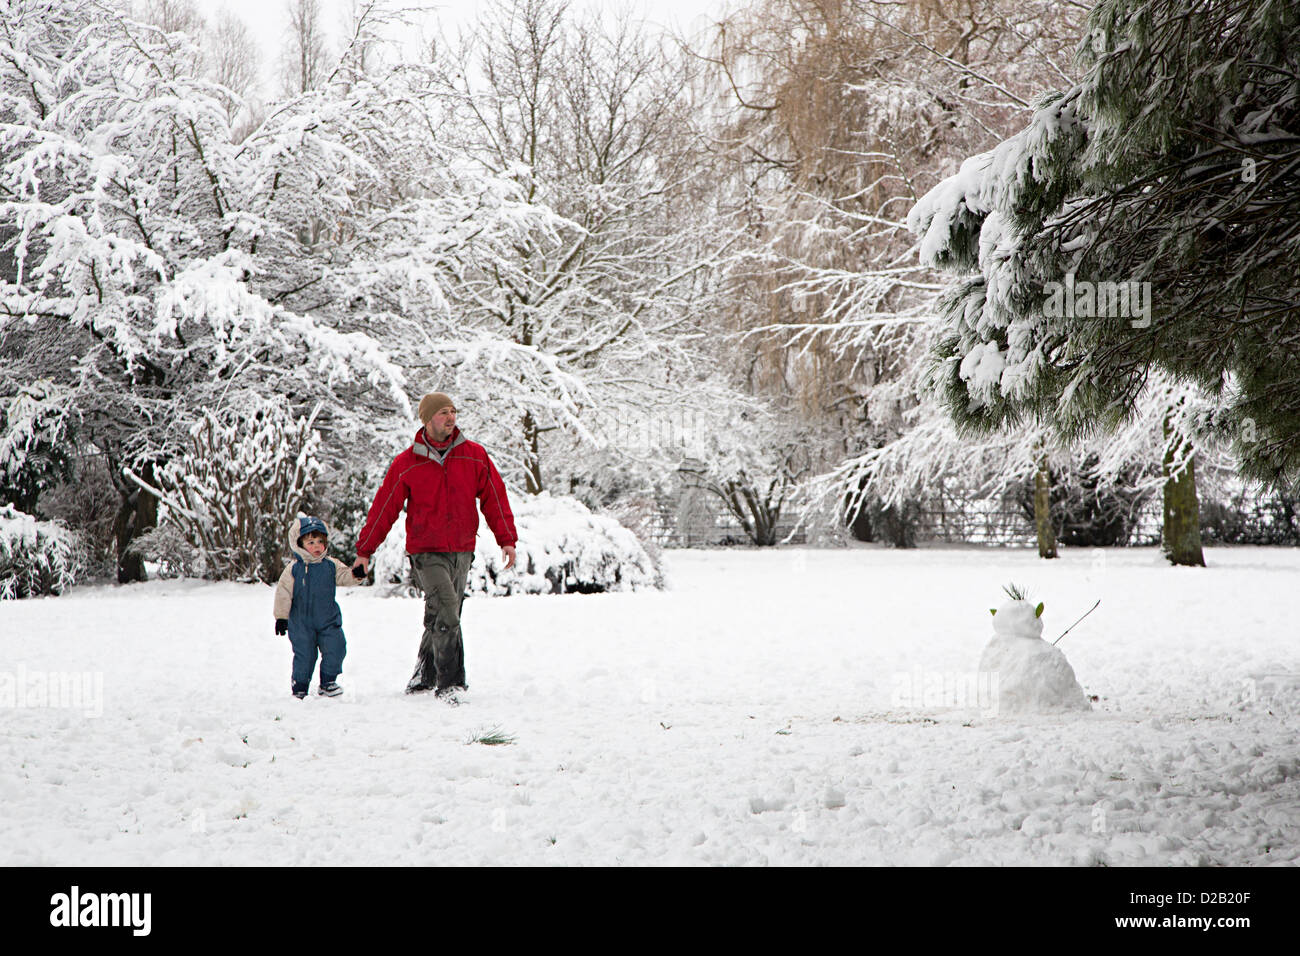 Man and child holding hands walking in snow in public park with snowman, Sophia Gardens, Abergavenny, Wales, UK Stock Photo